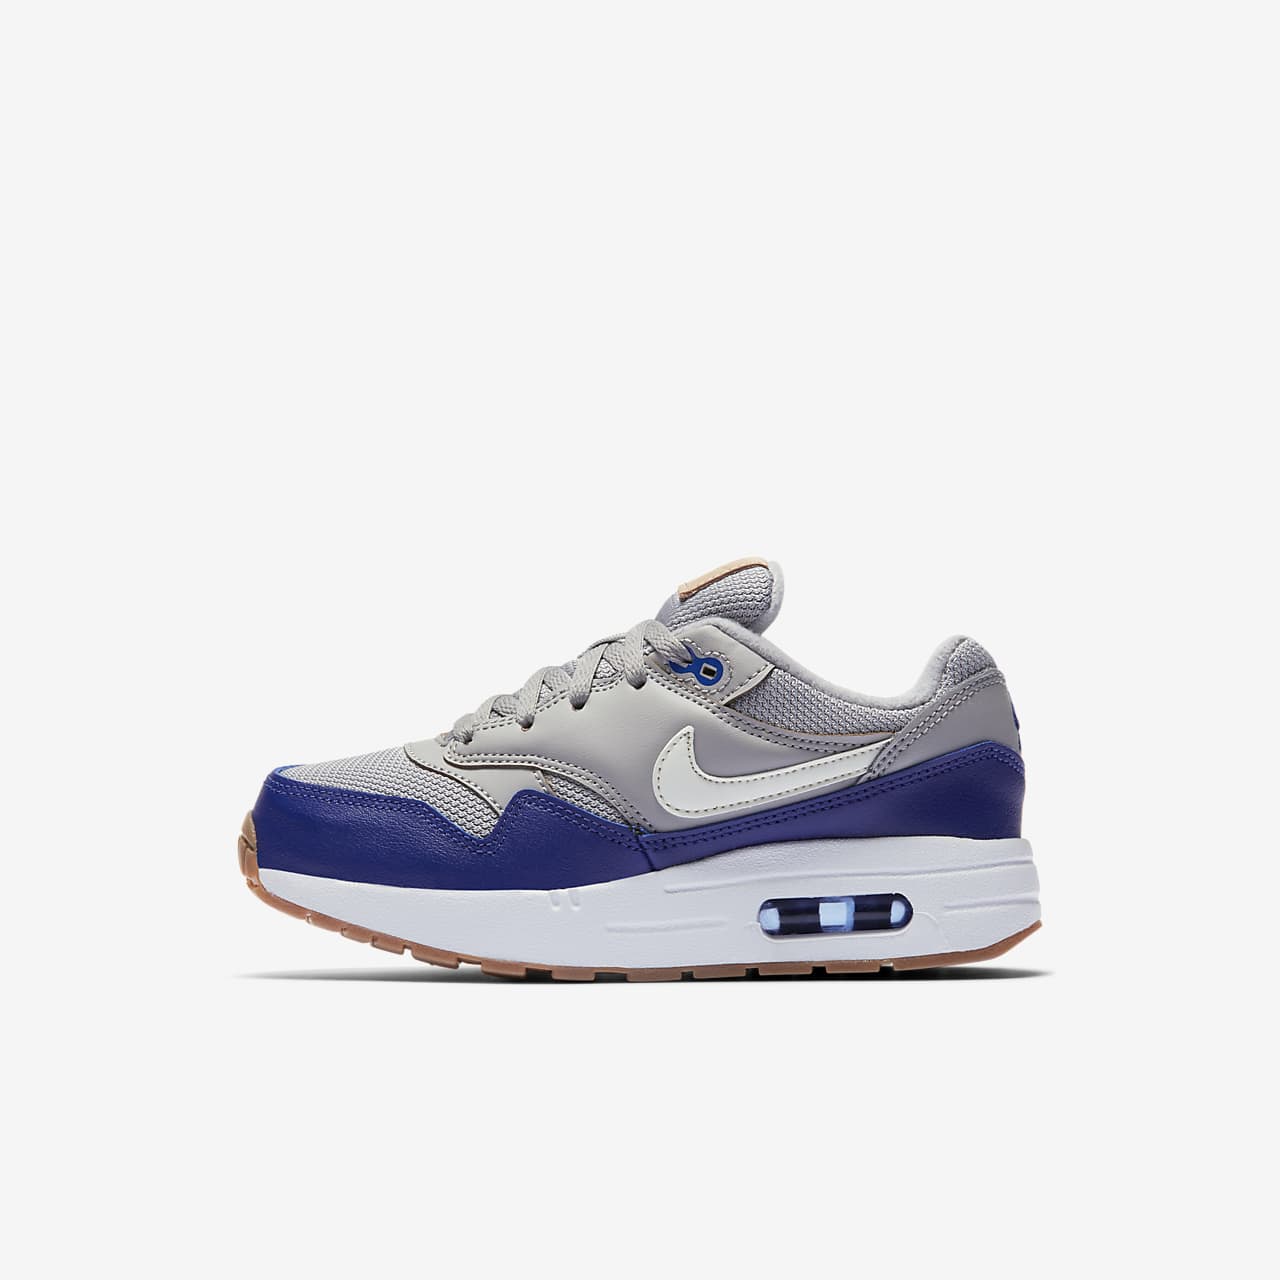 Nike Air Max 1 Younger Kids' Shoe